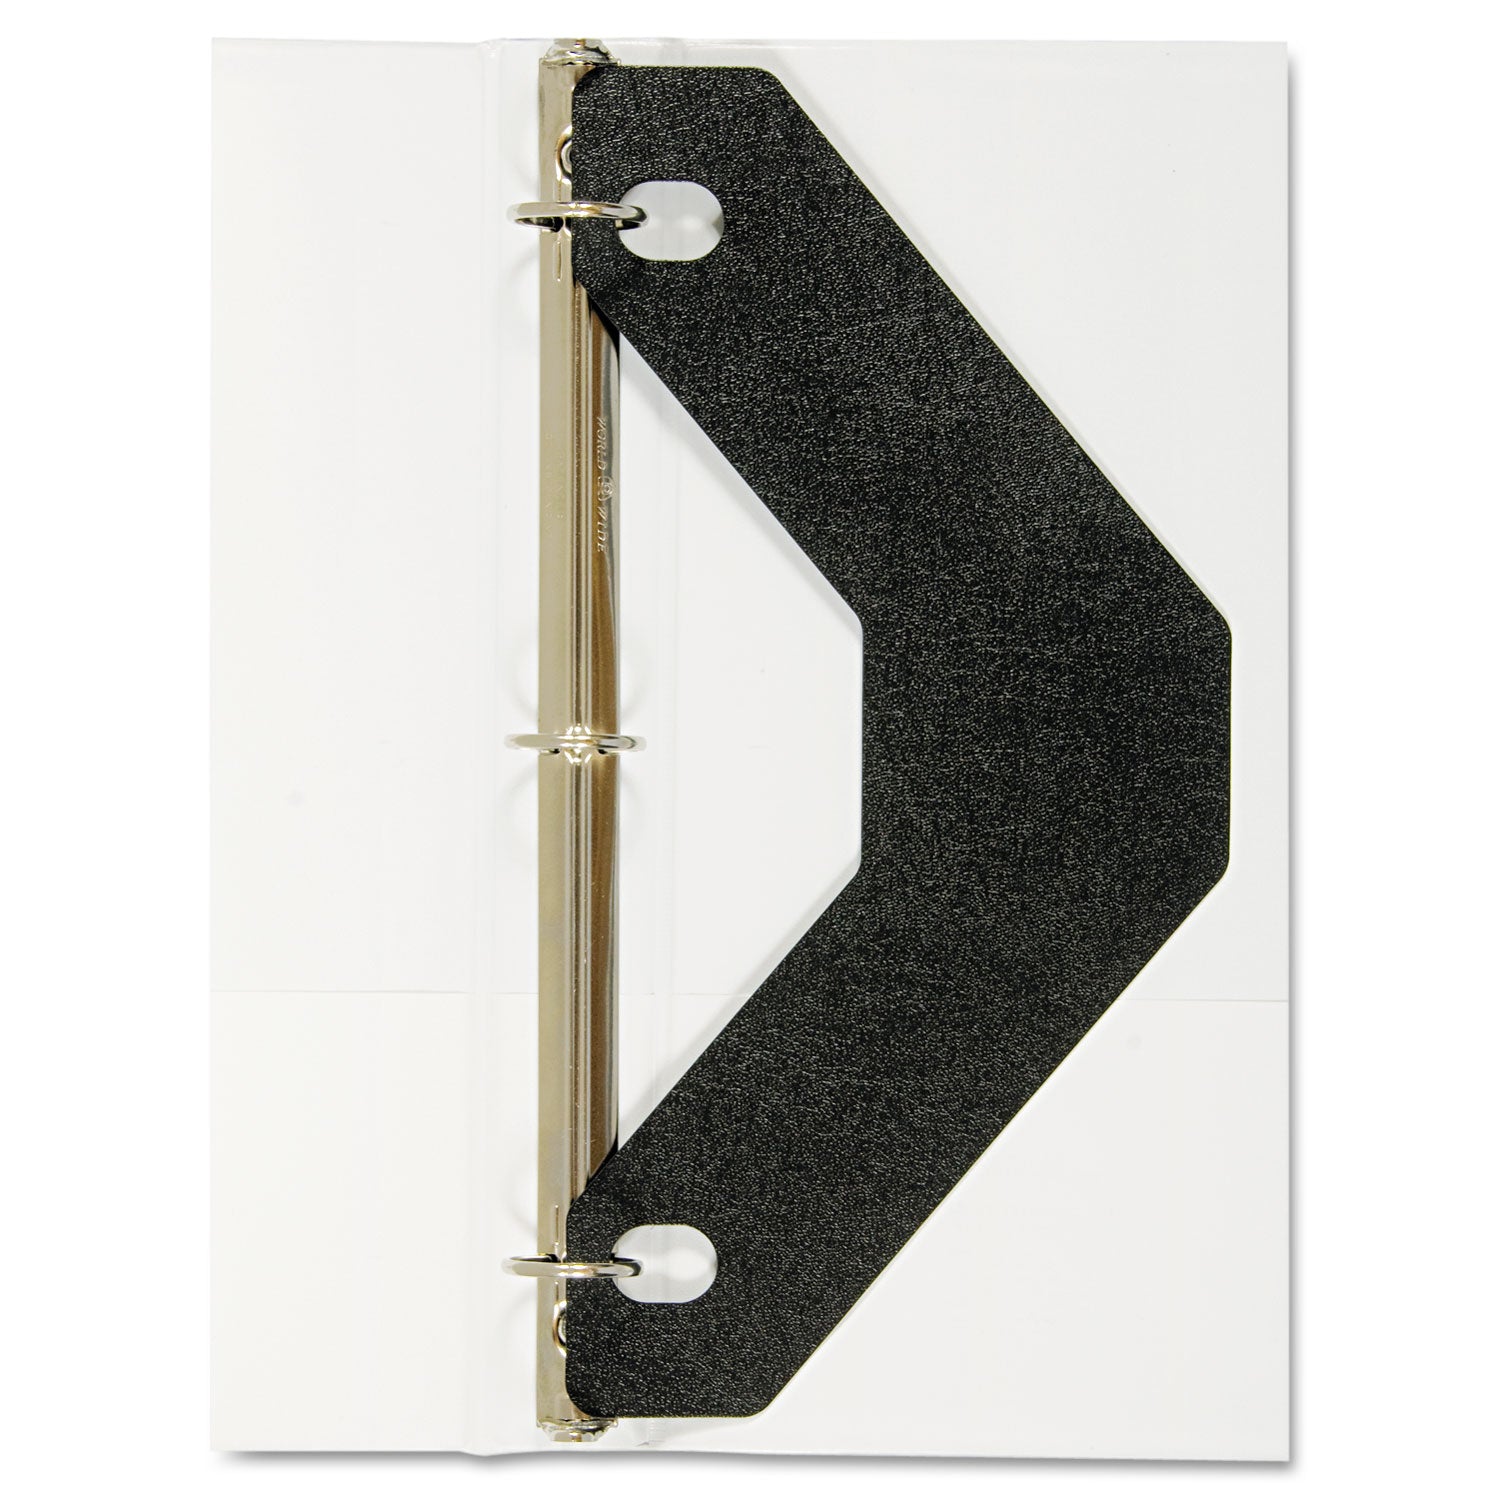 Triangle Shaped Sheet Lifter for Three-Ring Binder, Black, 2/Pack - 